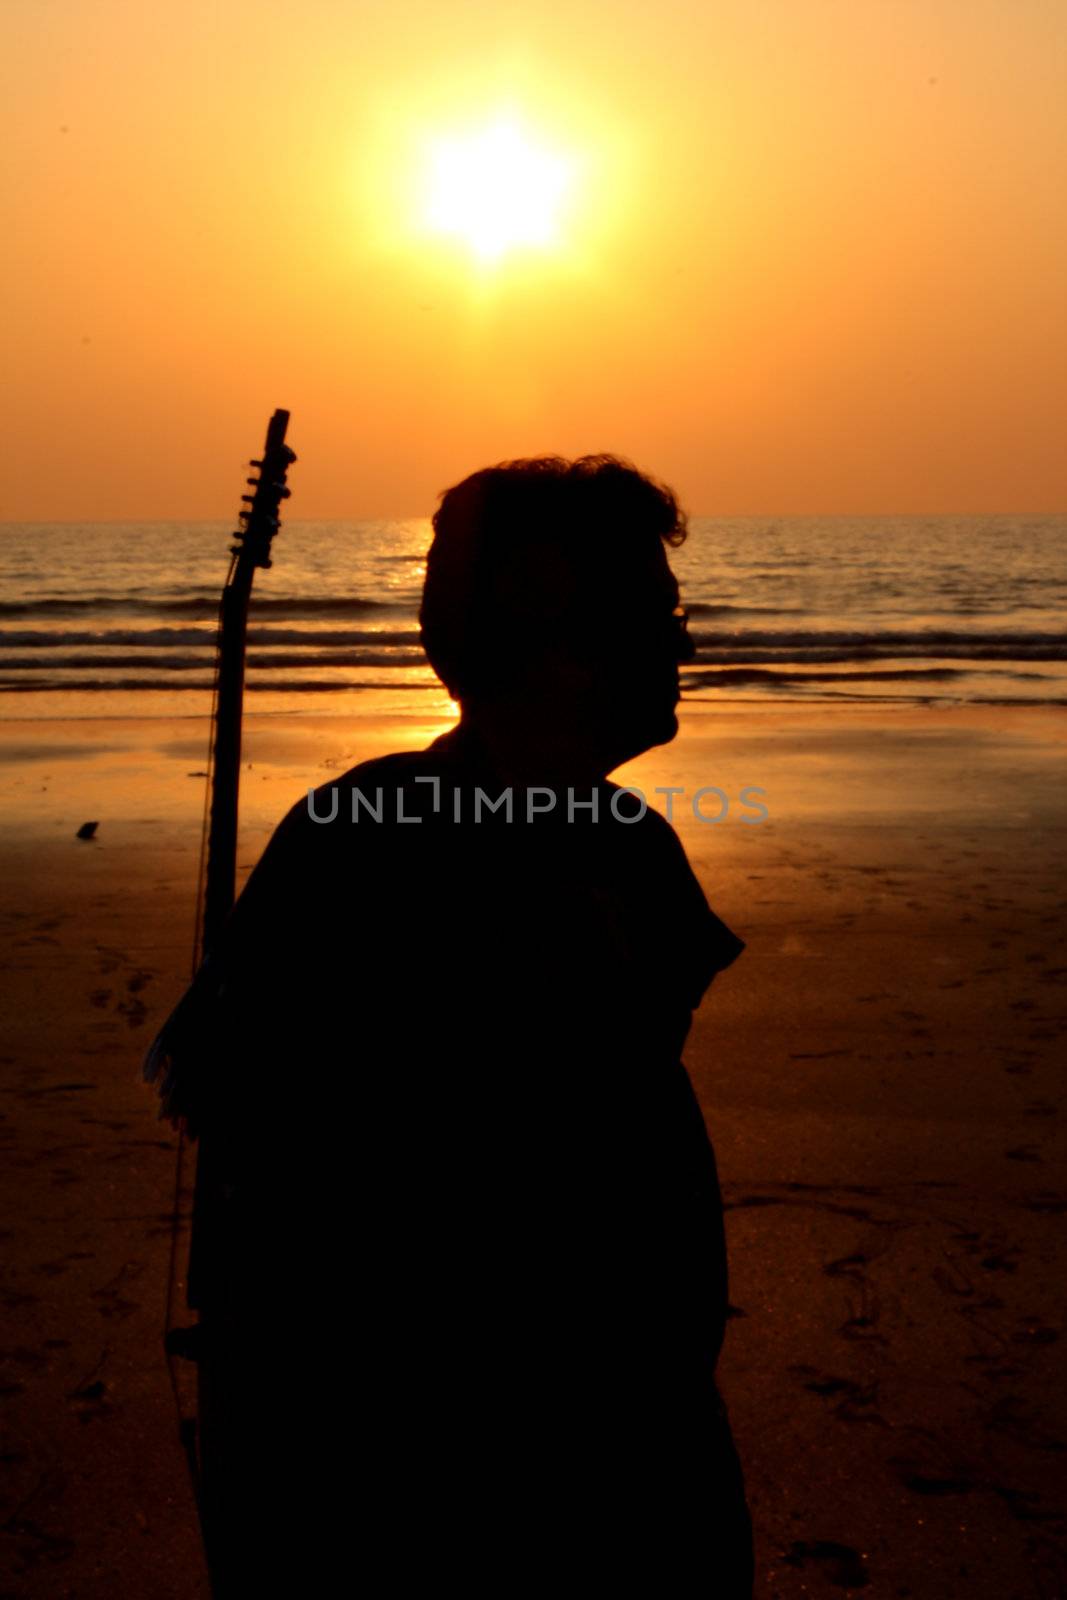 A silhouette of a lonely guitarist on a beach at sunset.